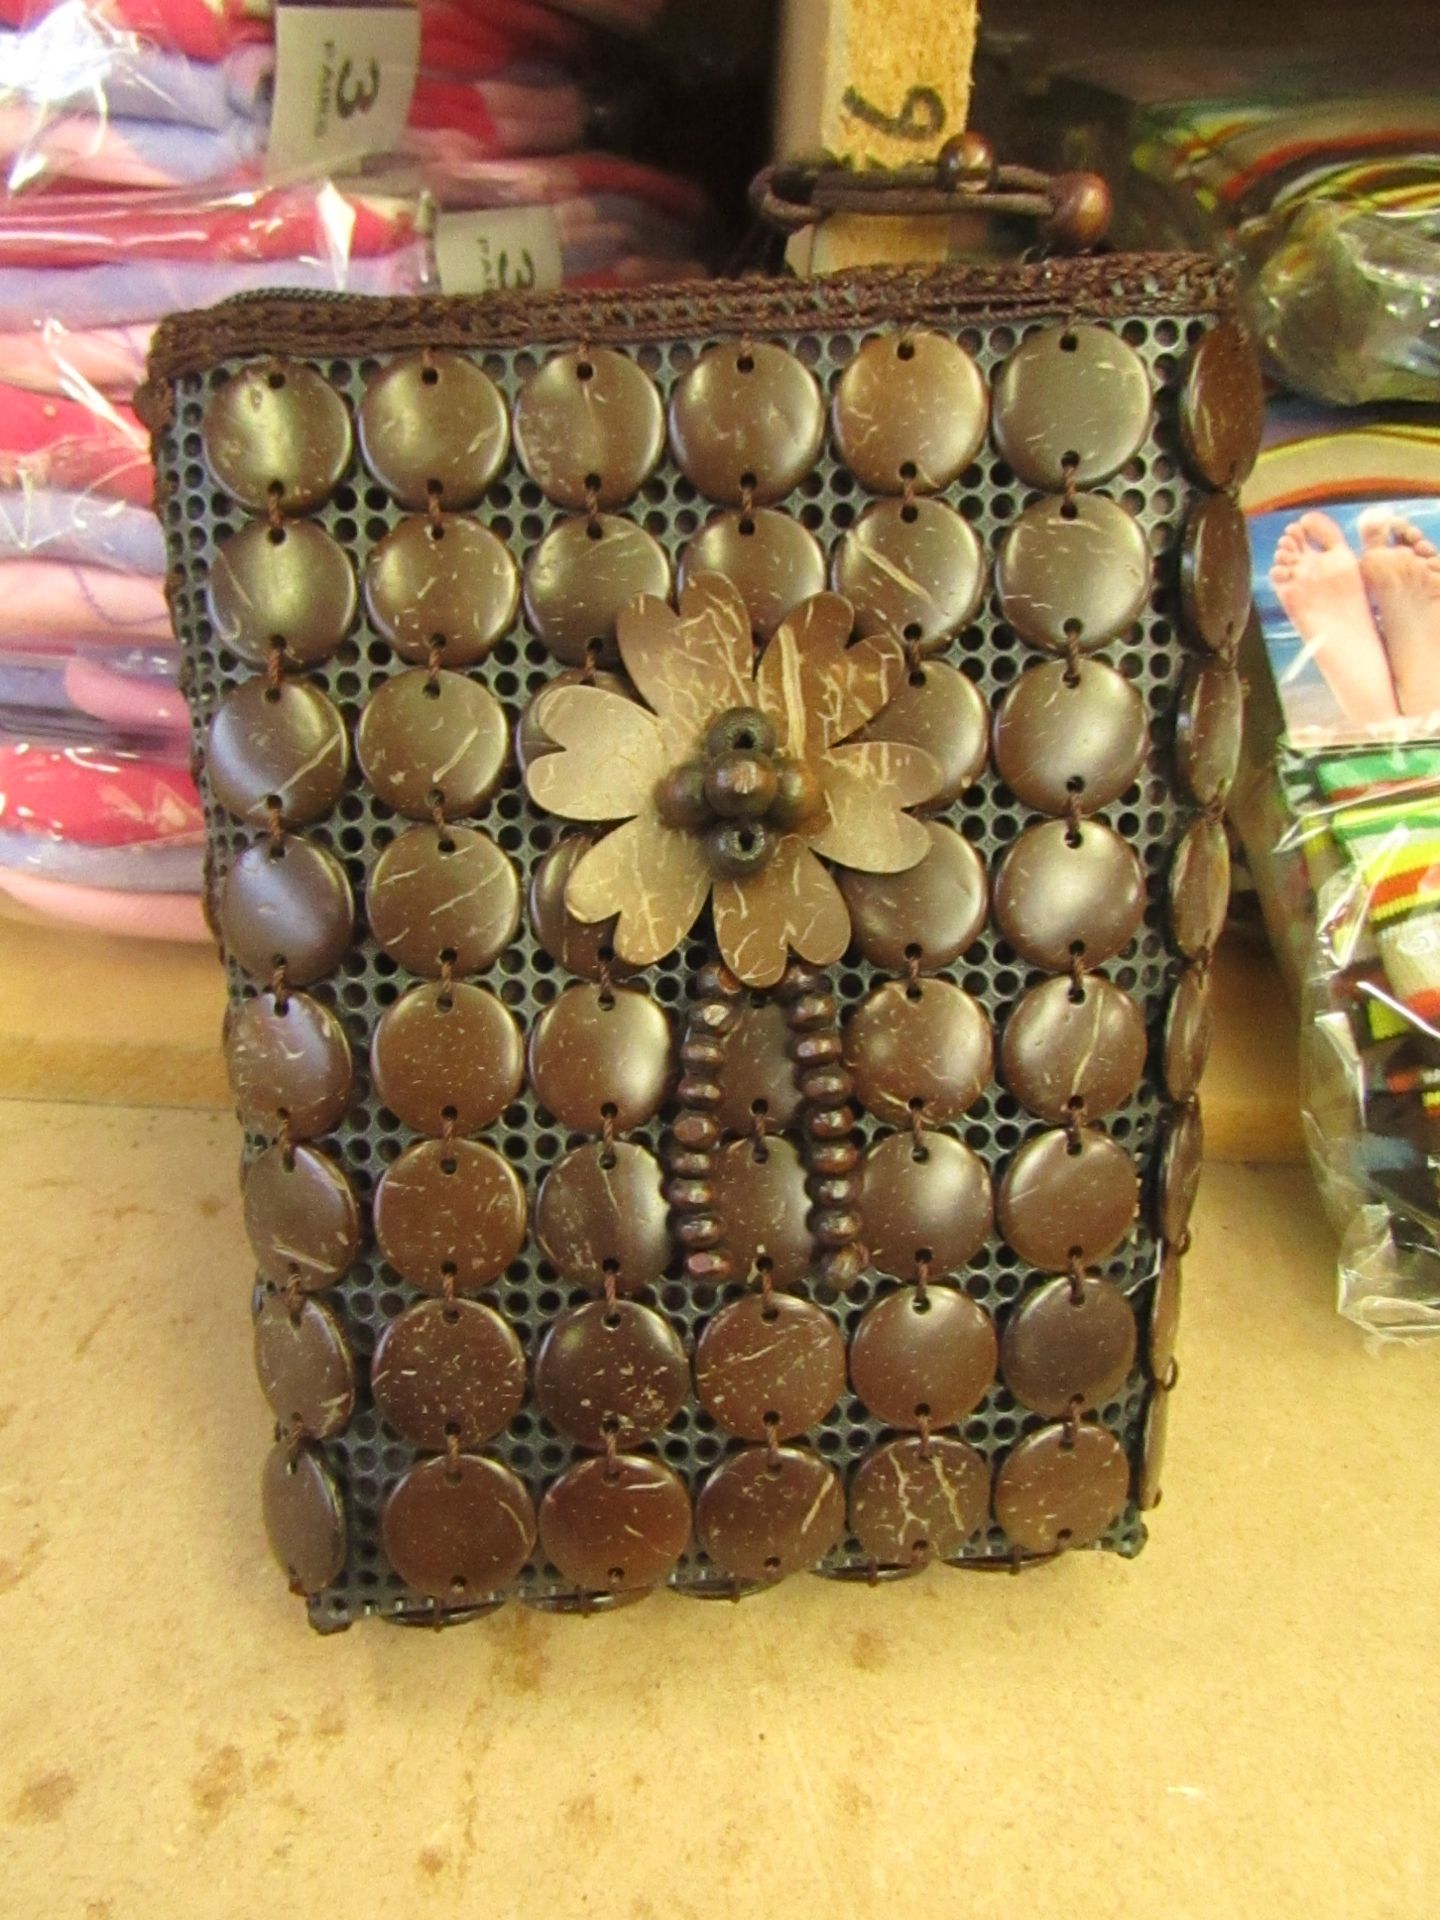 2 x Ladies Handcrafted Handbag new (see image for design)